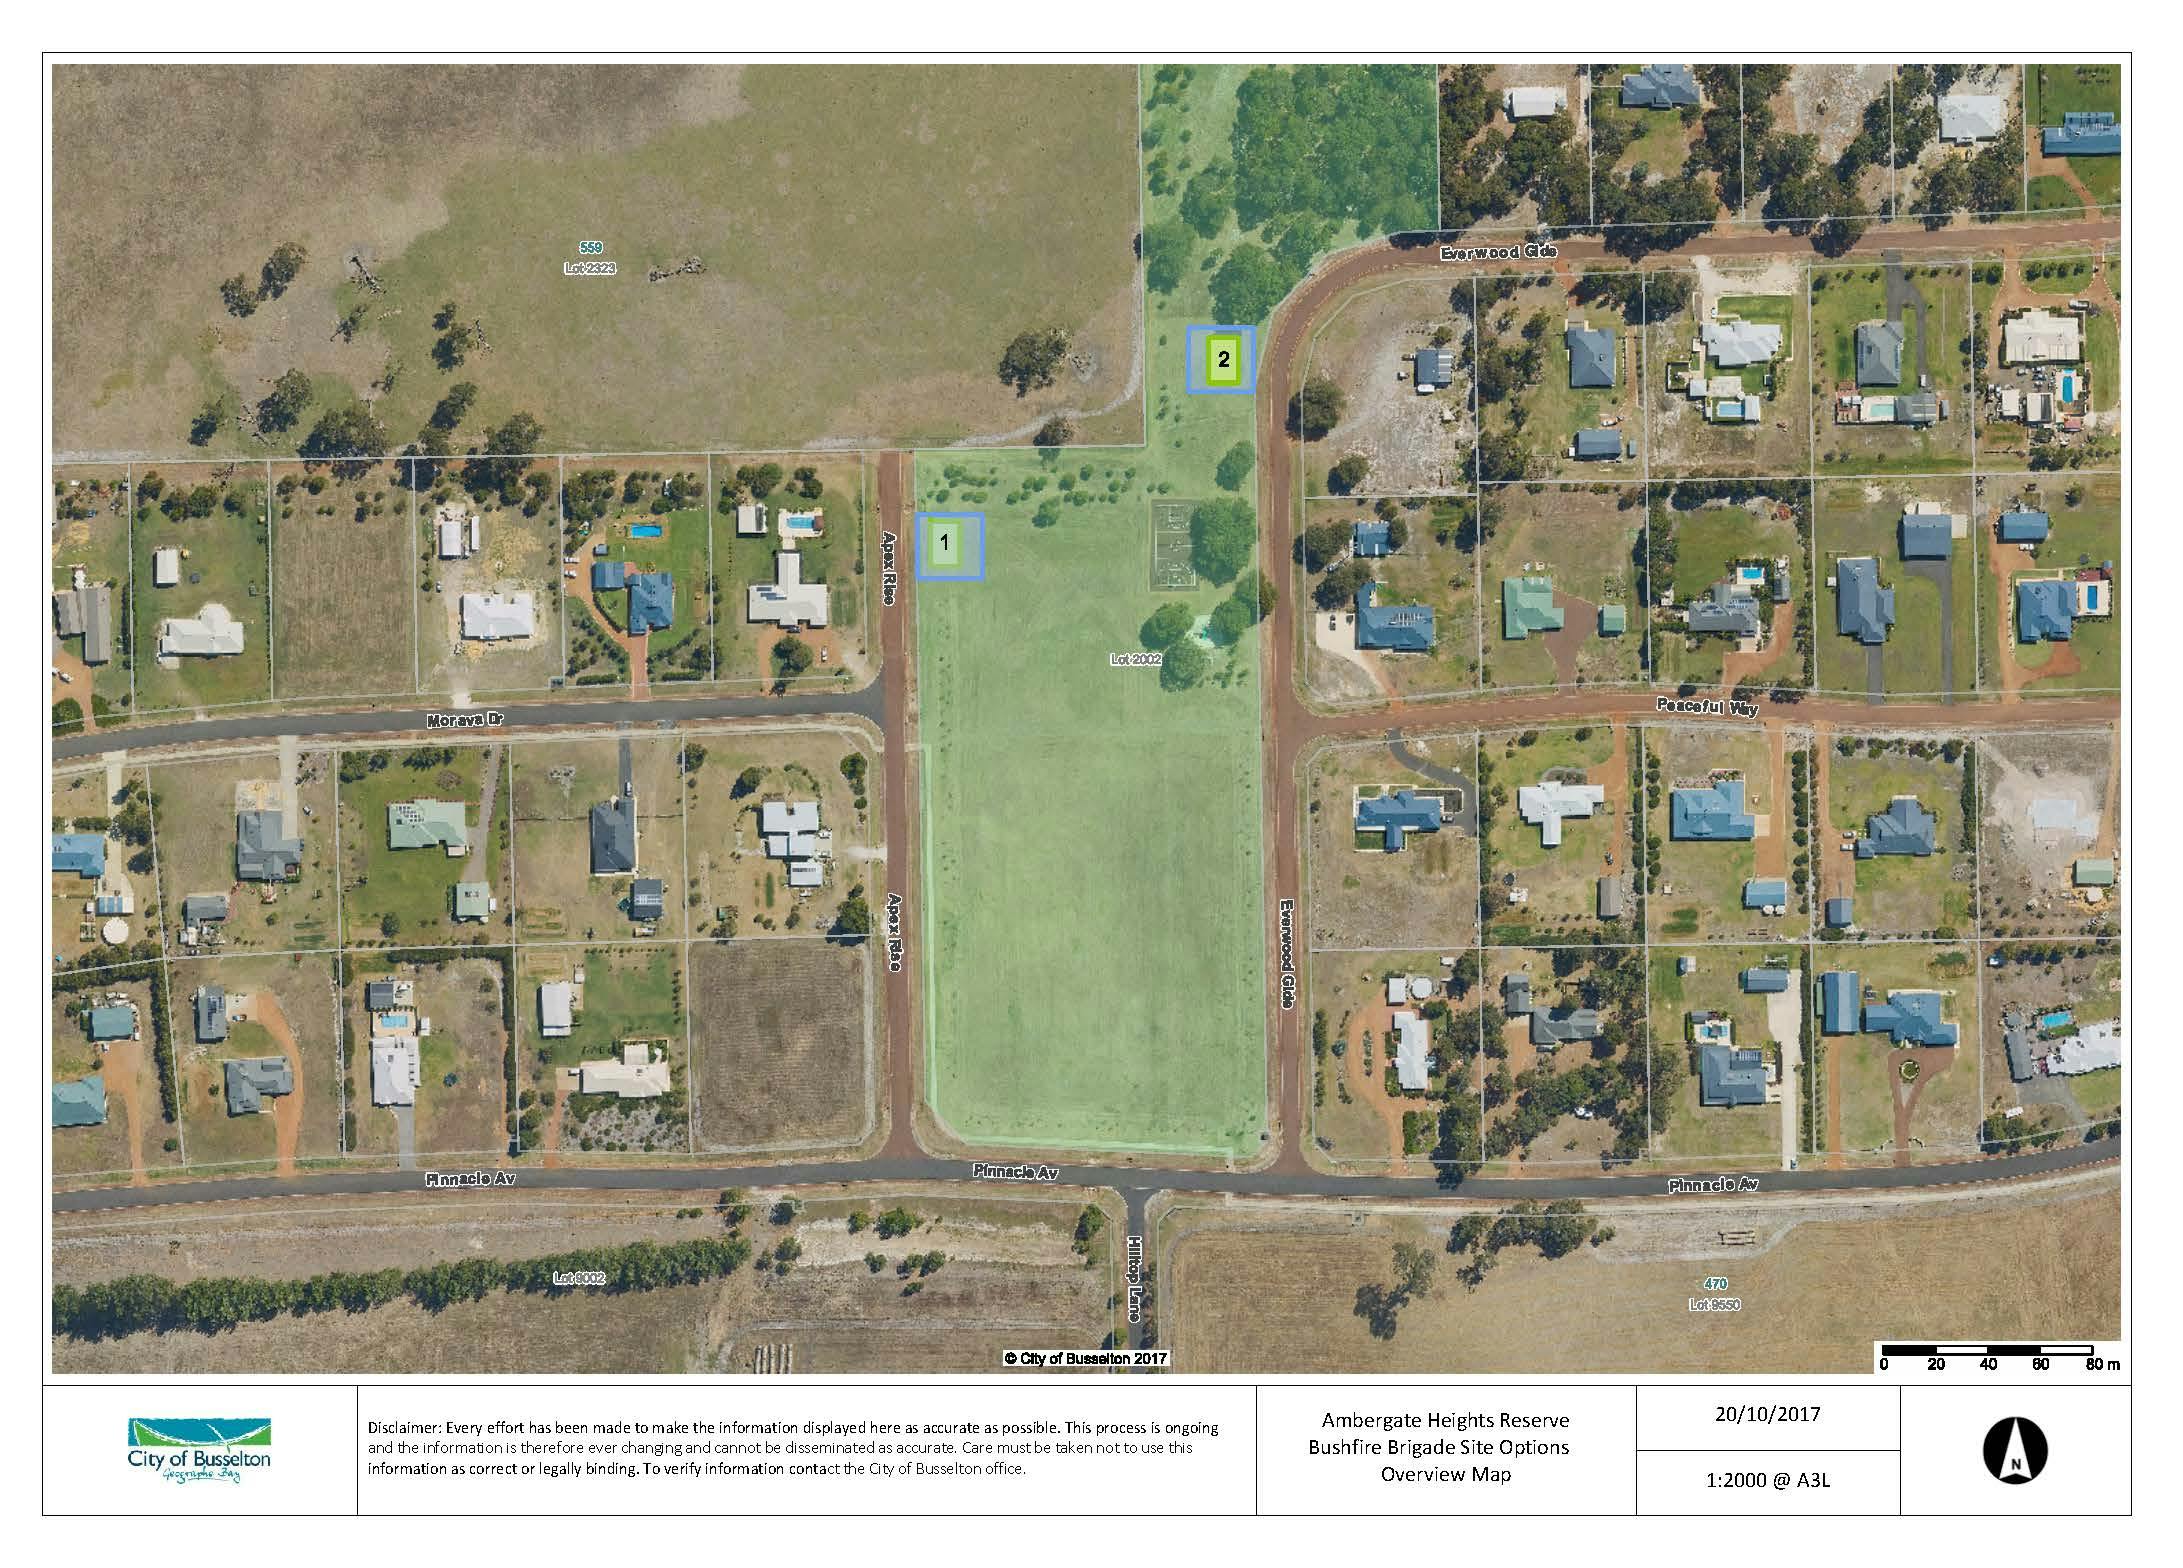 Figure 3 shows the 2 locations (yellow boxes identified as 1 and 2) on Apex Park where the proposed fire shed/community facility is being considered. 